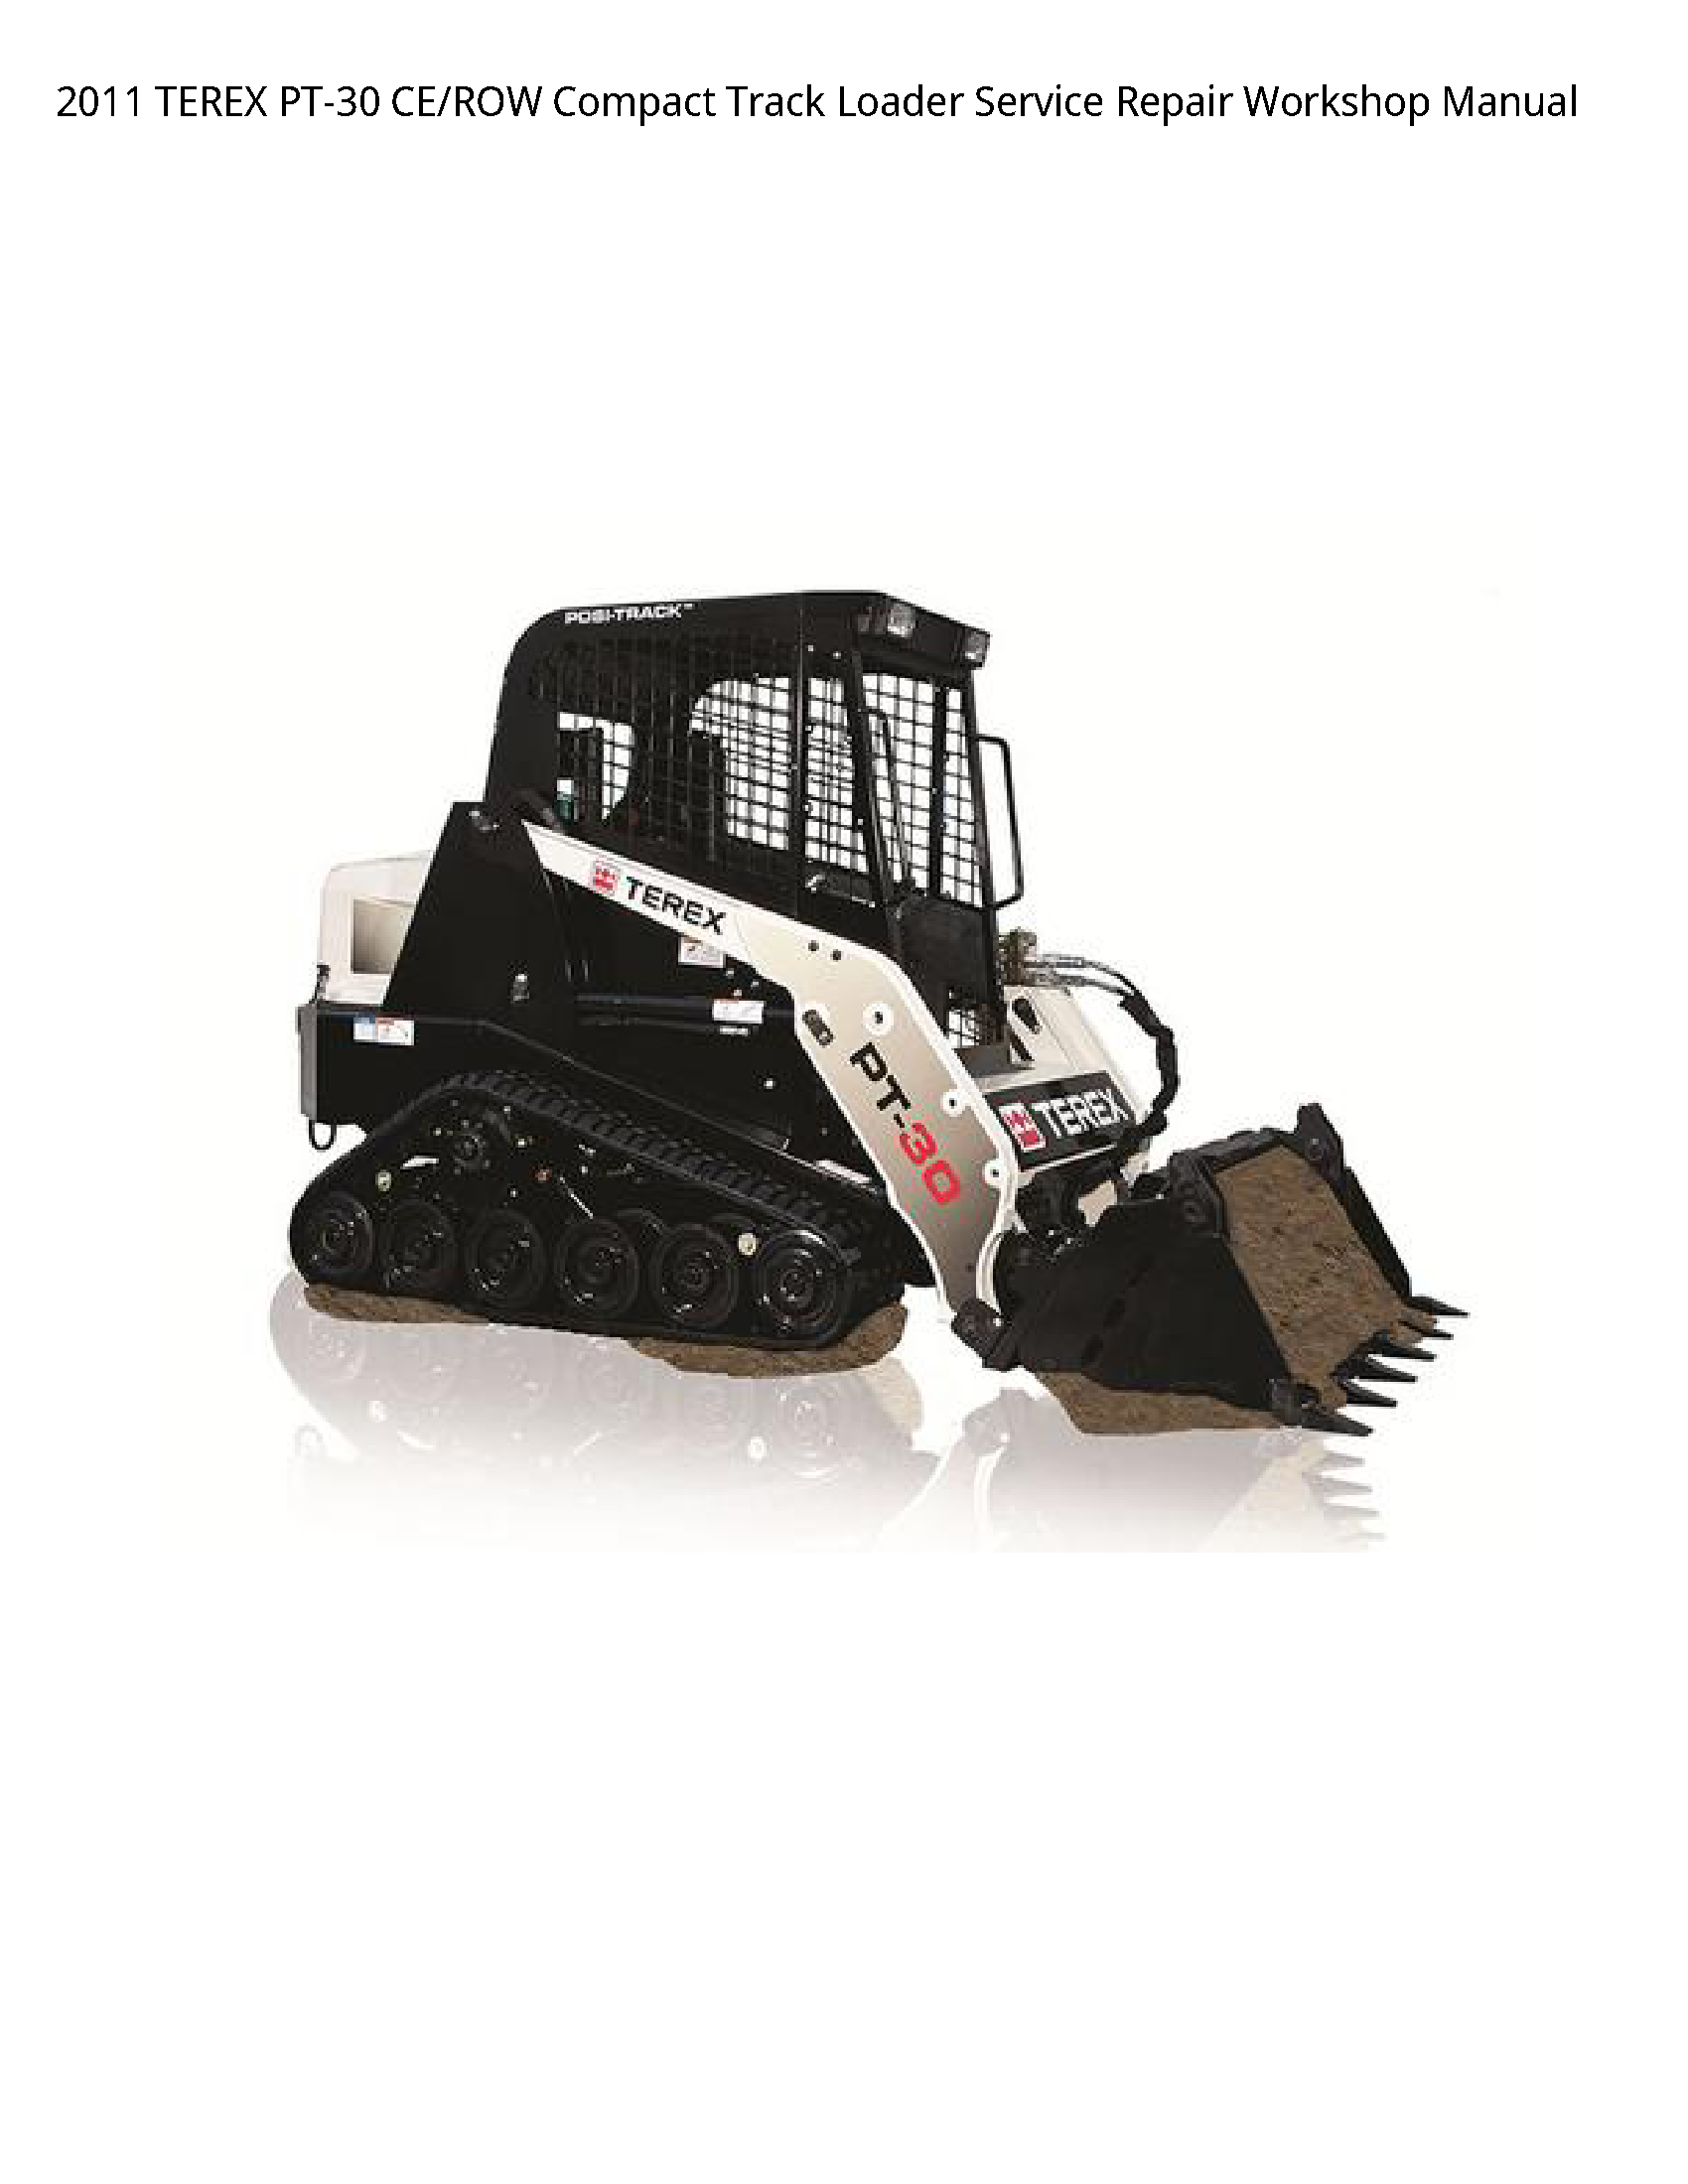 Terex PT-30 CE/ROW Compact Track Loader manual